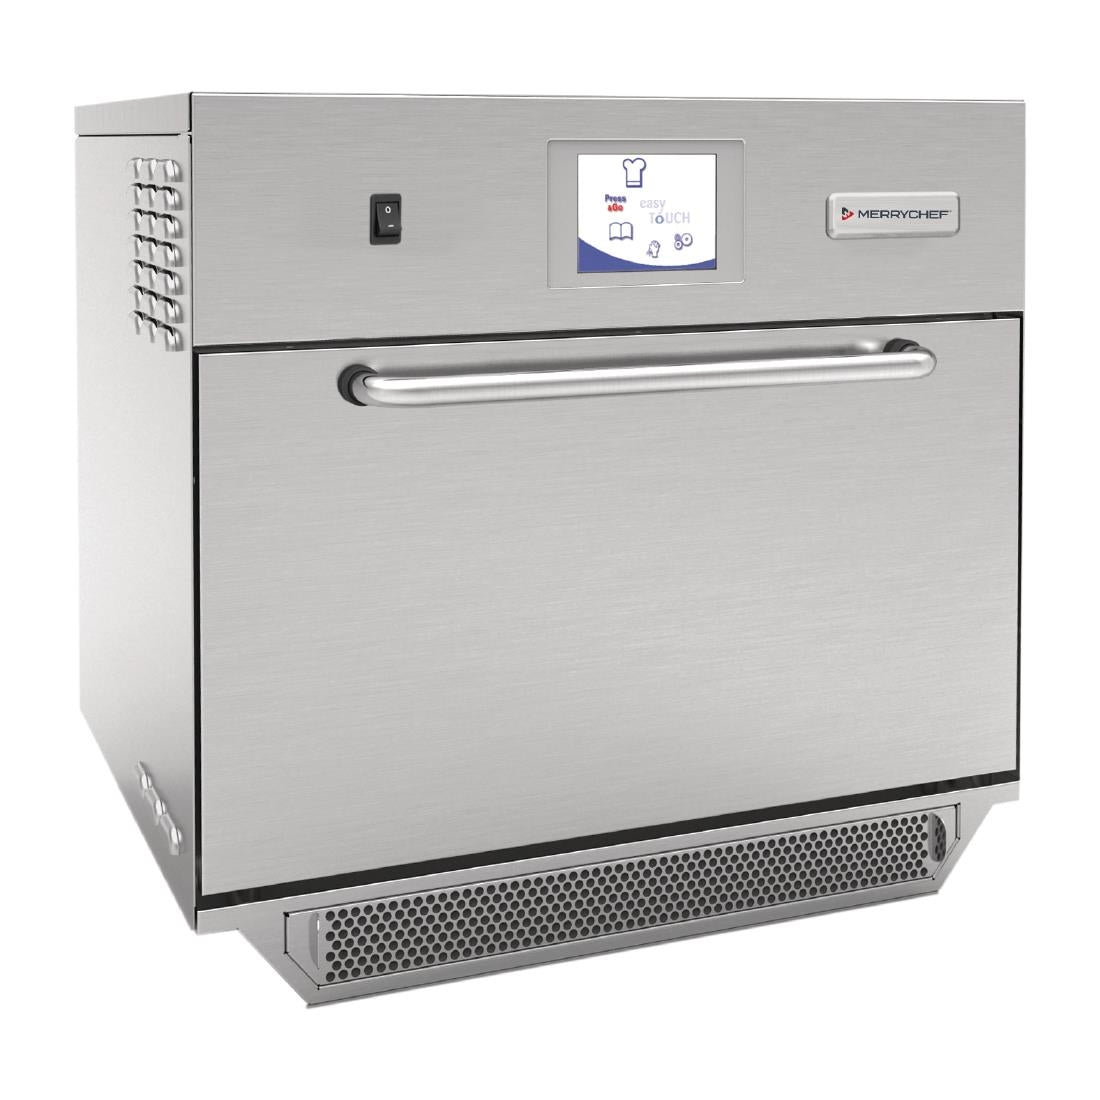 MERRYCHEF EIKON  E5 High Speed Oven.Product Ref:00668.Model: E5C. 🚚 5-7 Days Delivery